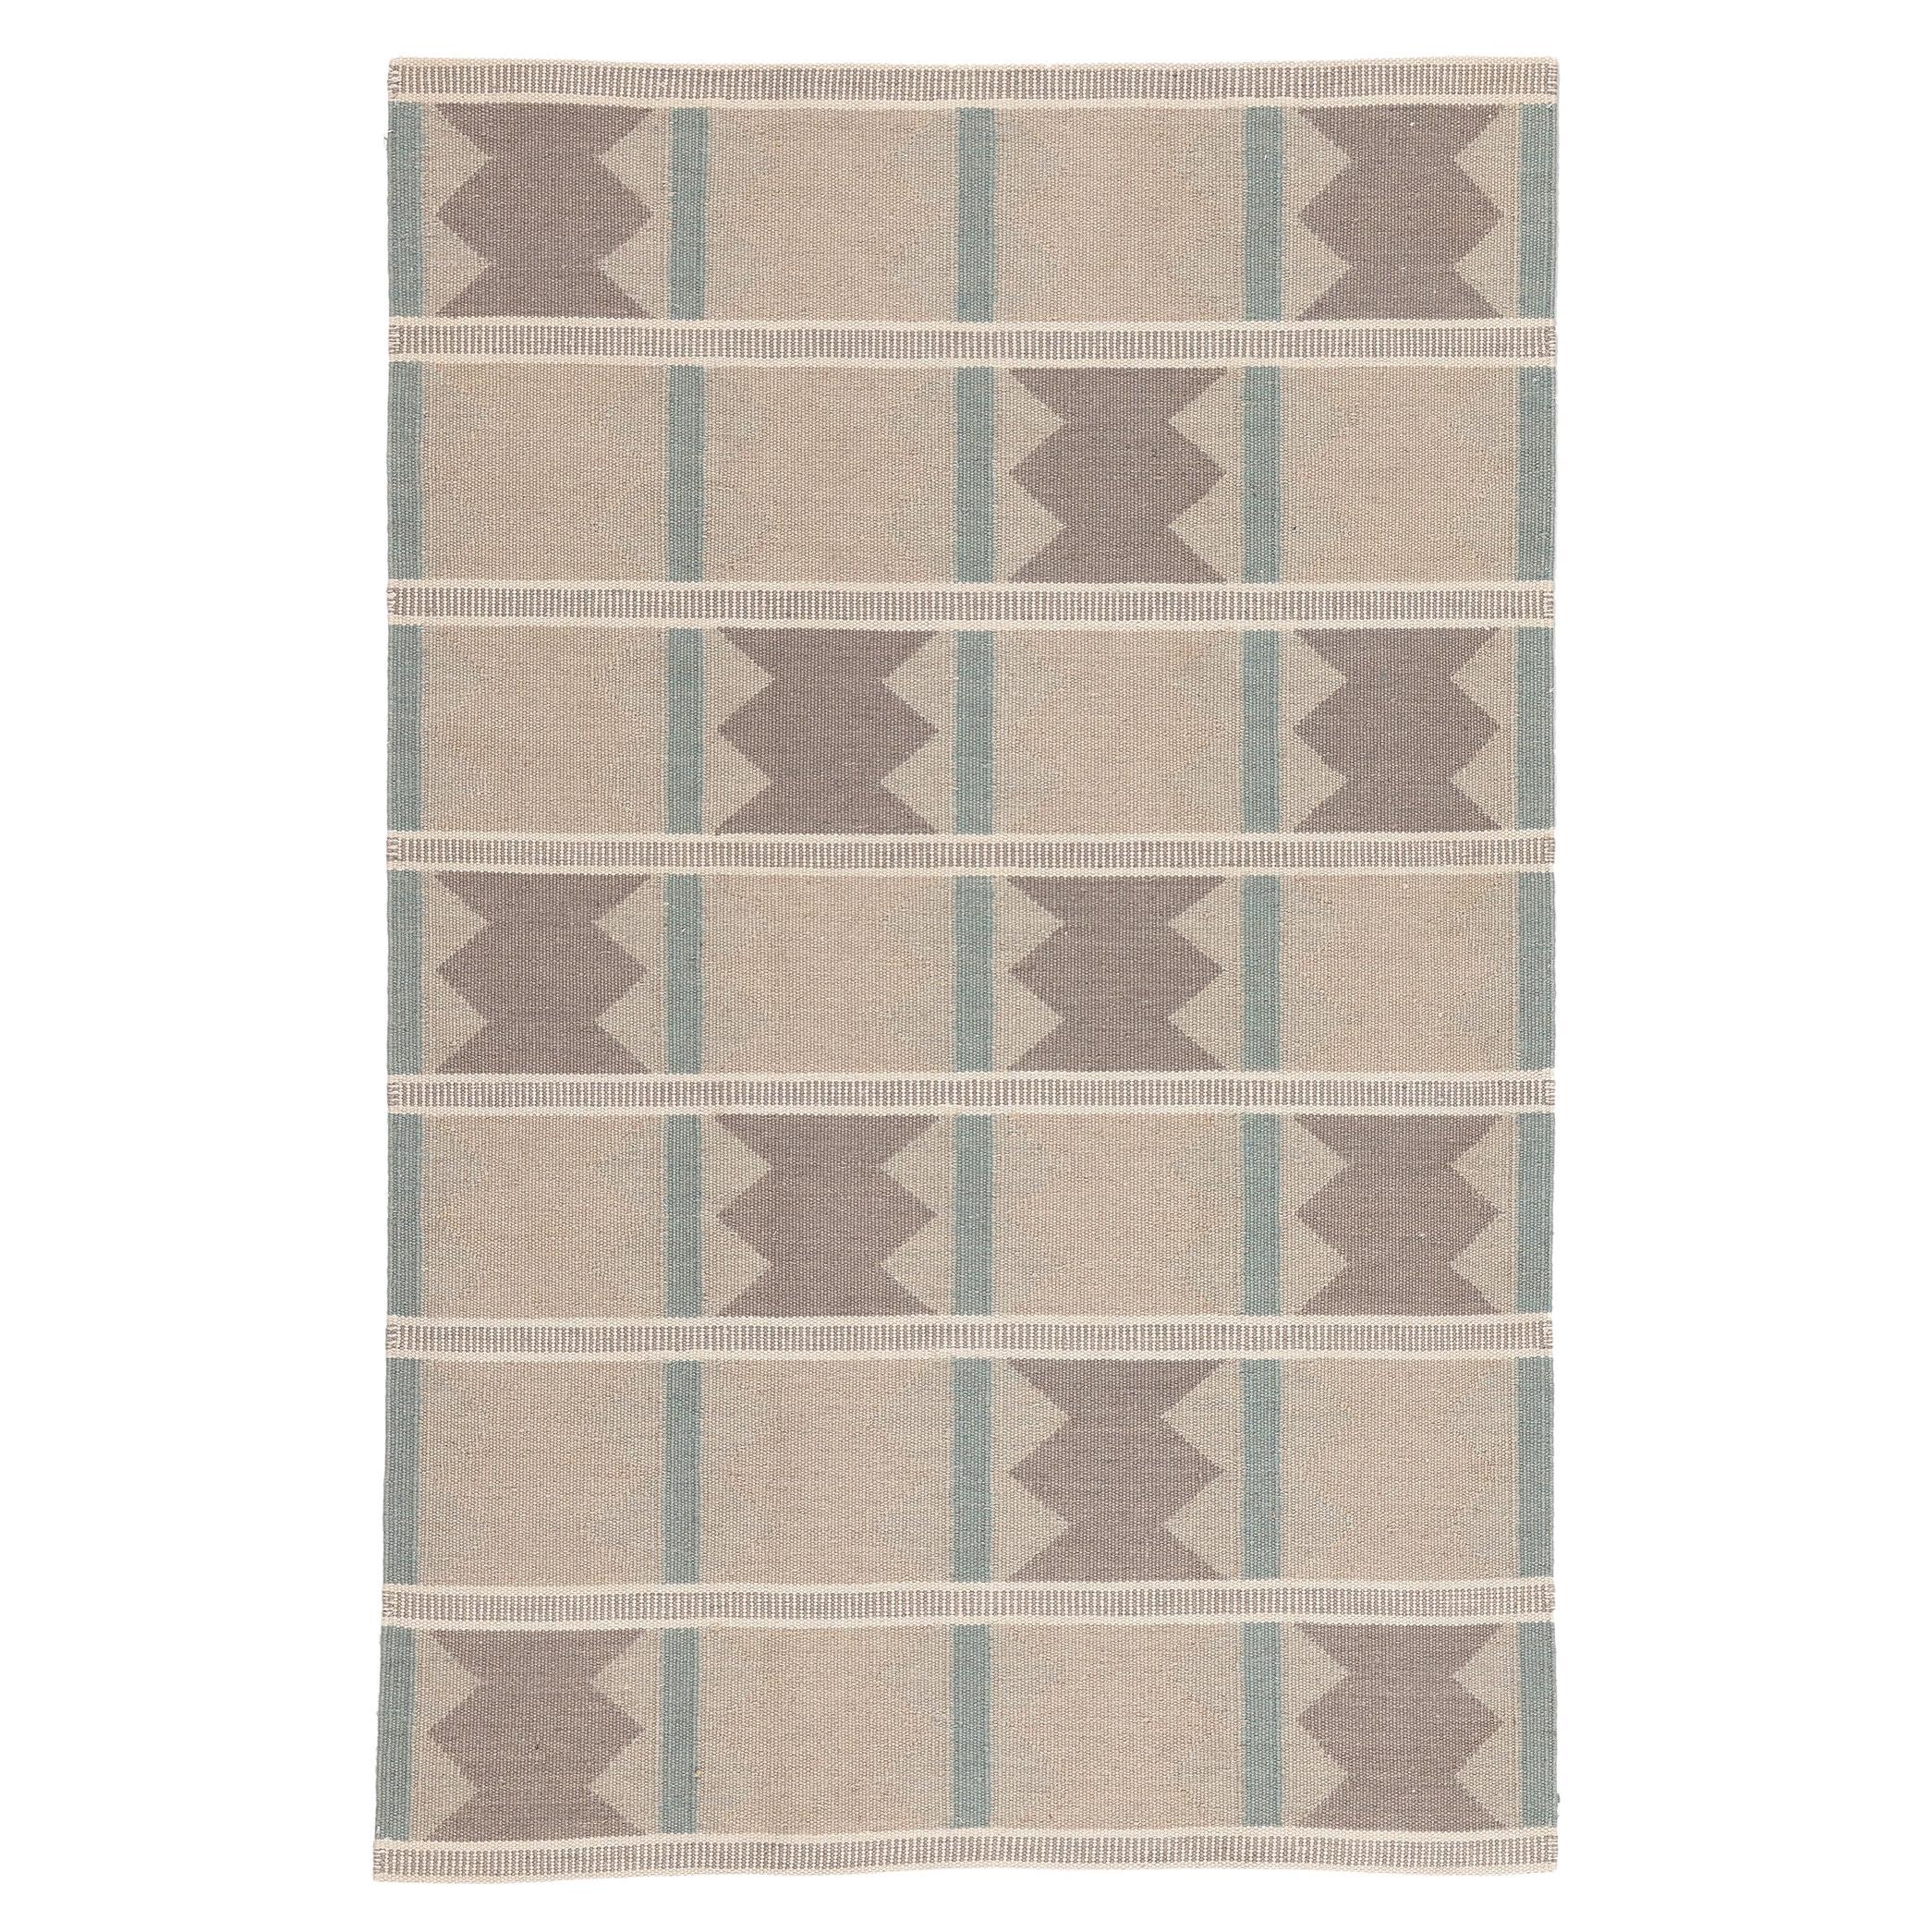 Ingegerd Silow Swedish Inspired Kilim Rug, Scandi Style Meets Sublime Simplicity For Sale